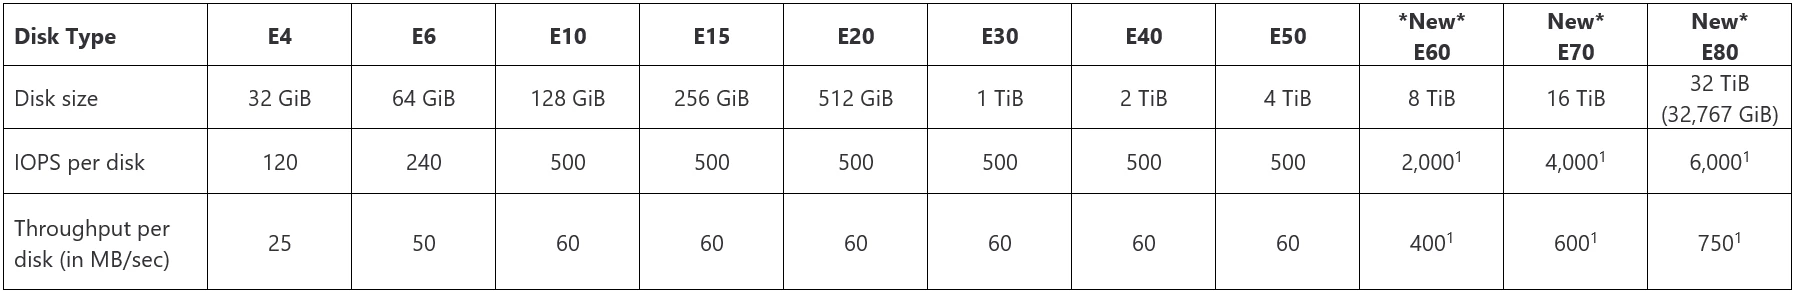 Table displaying Standard SSD disks type, size, IOPS per disk, and throughput per disk.